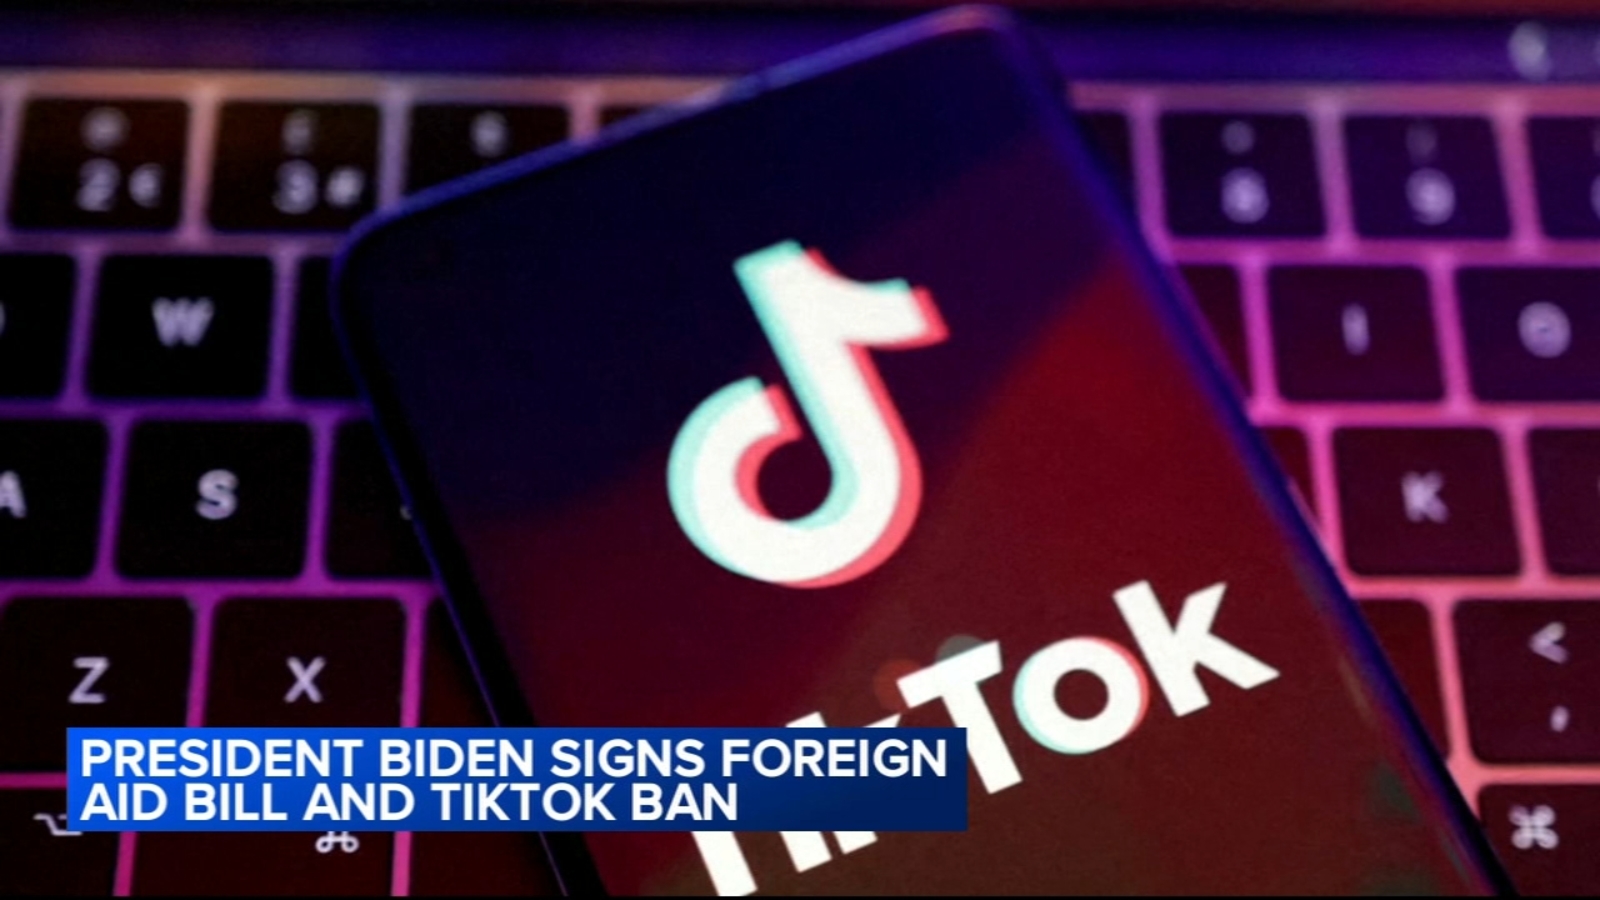 TikTok ban? Your key questions answered about possible banning of popular video sharing app